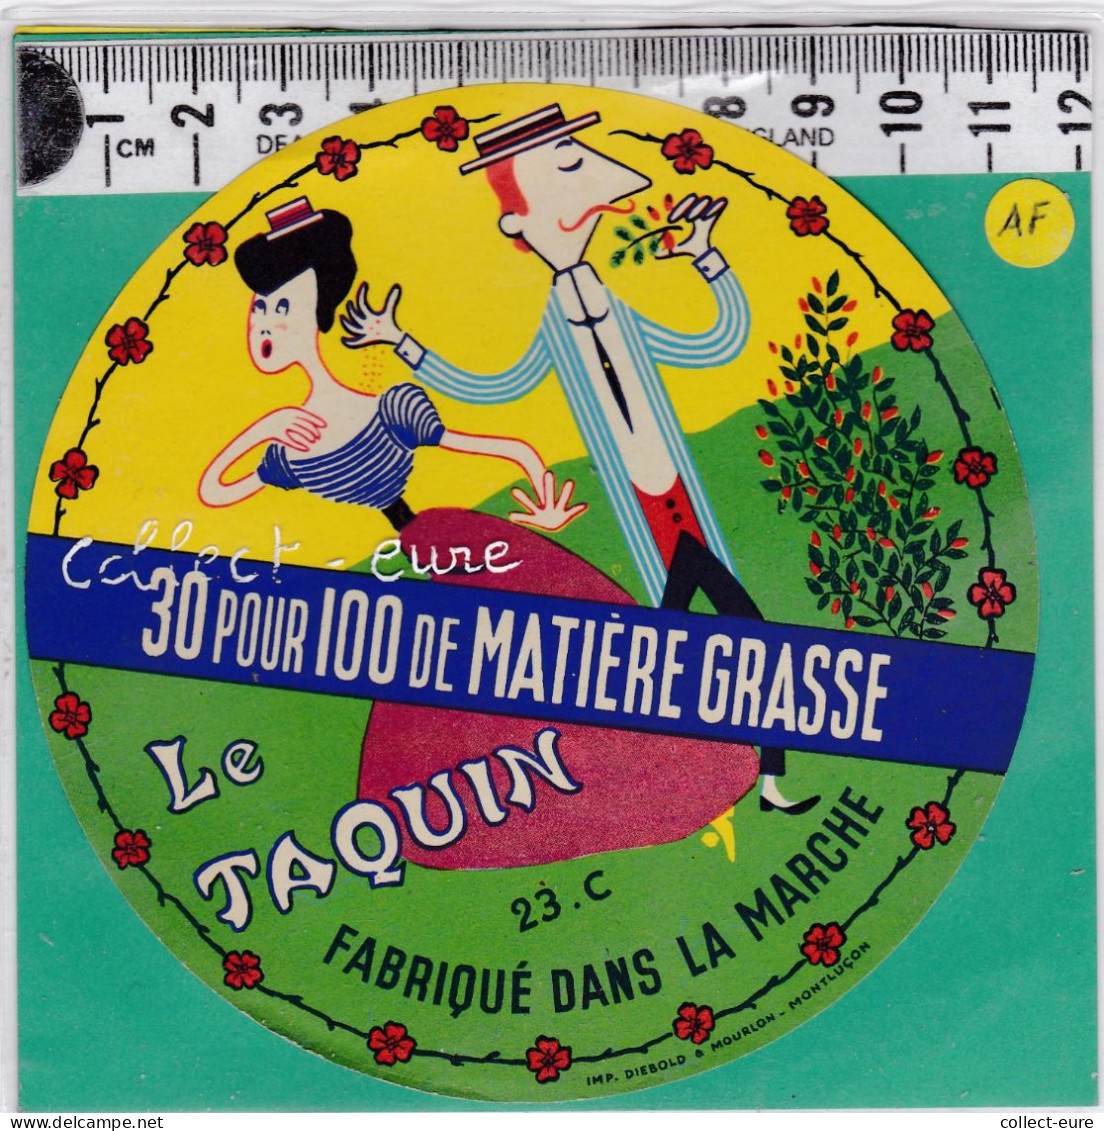 C1349 FROMAGE LE TAQUIN BOURGANEUF CREUSE - Cheese